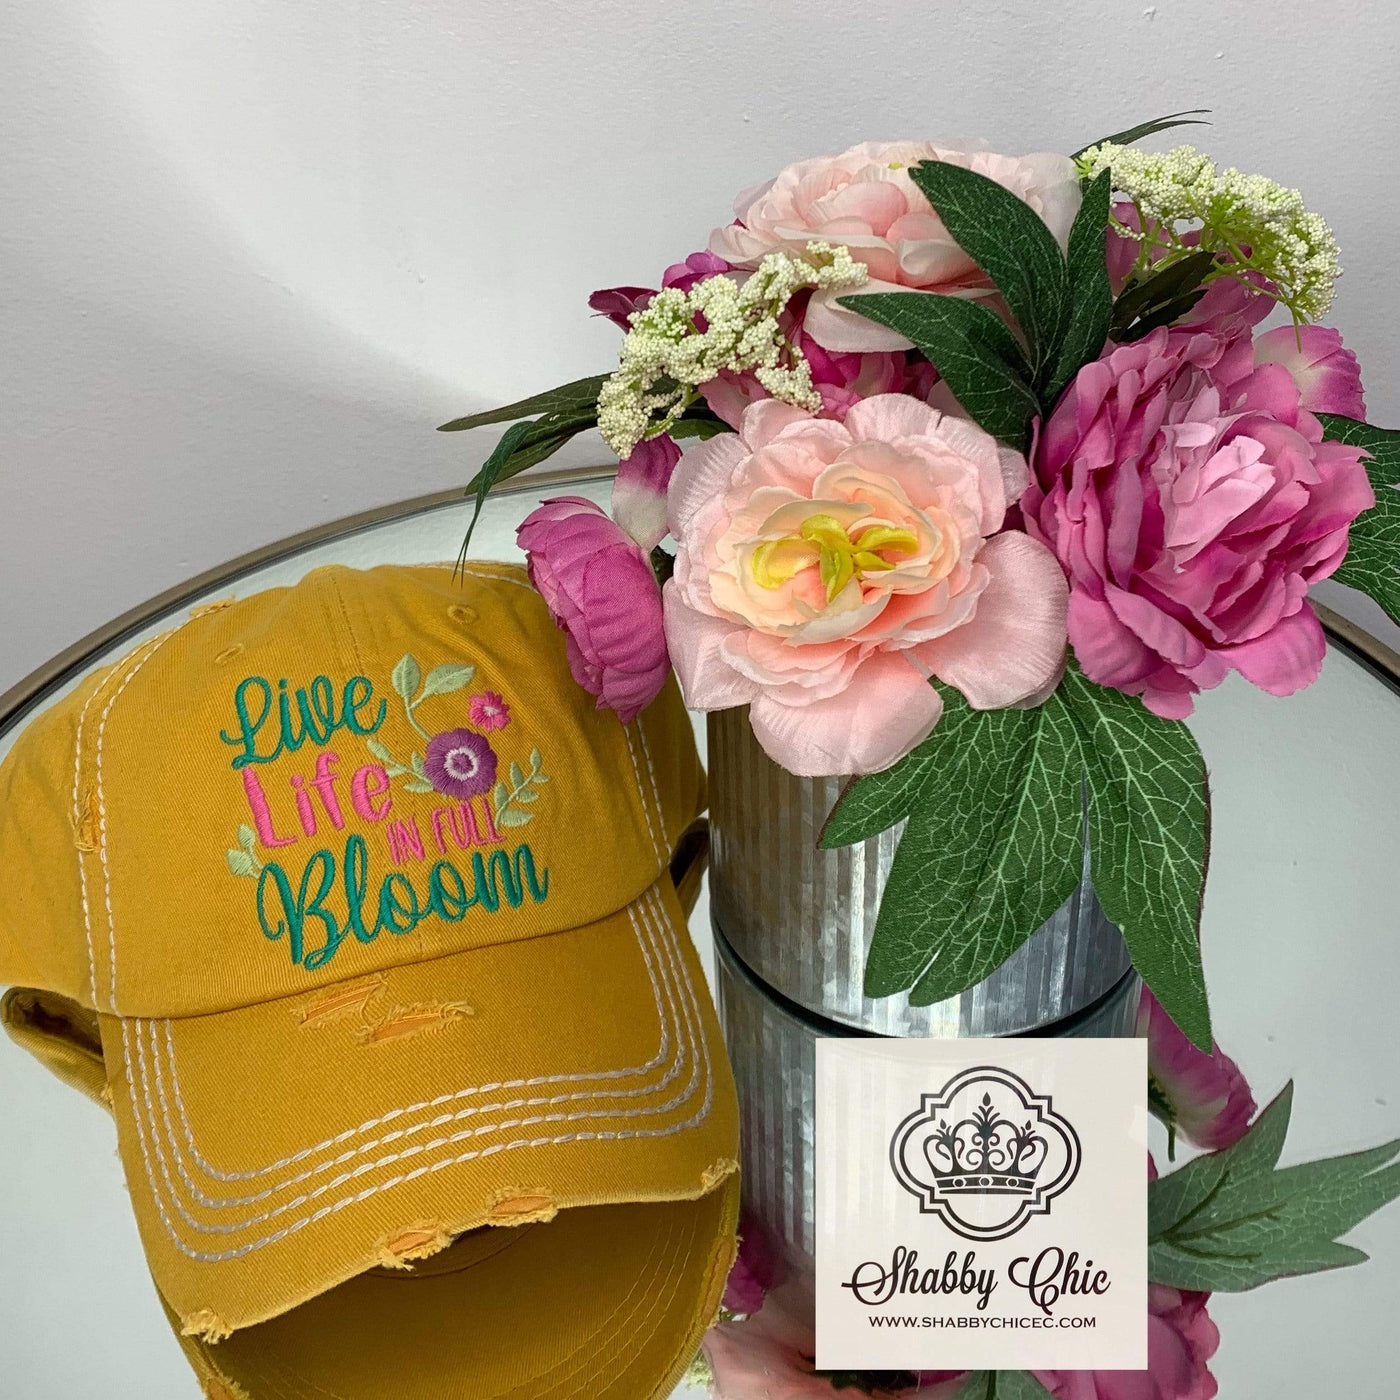 Live Life in Full Bloom Cap Shabby Chic Boutique and Tanning Salon